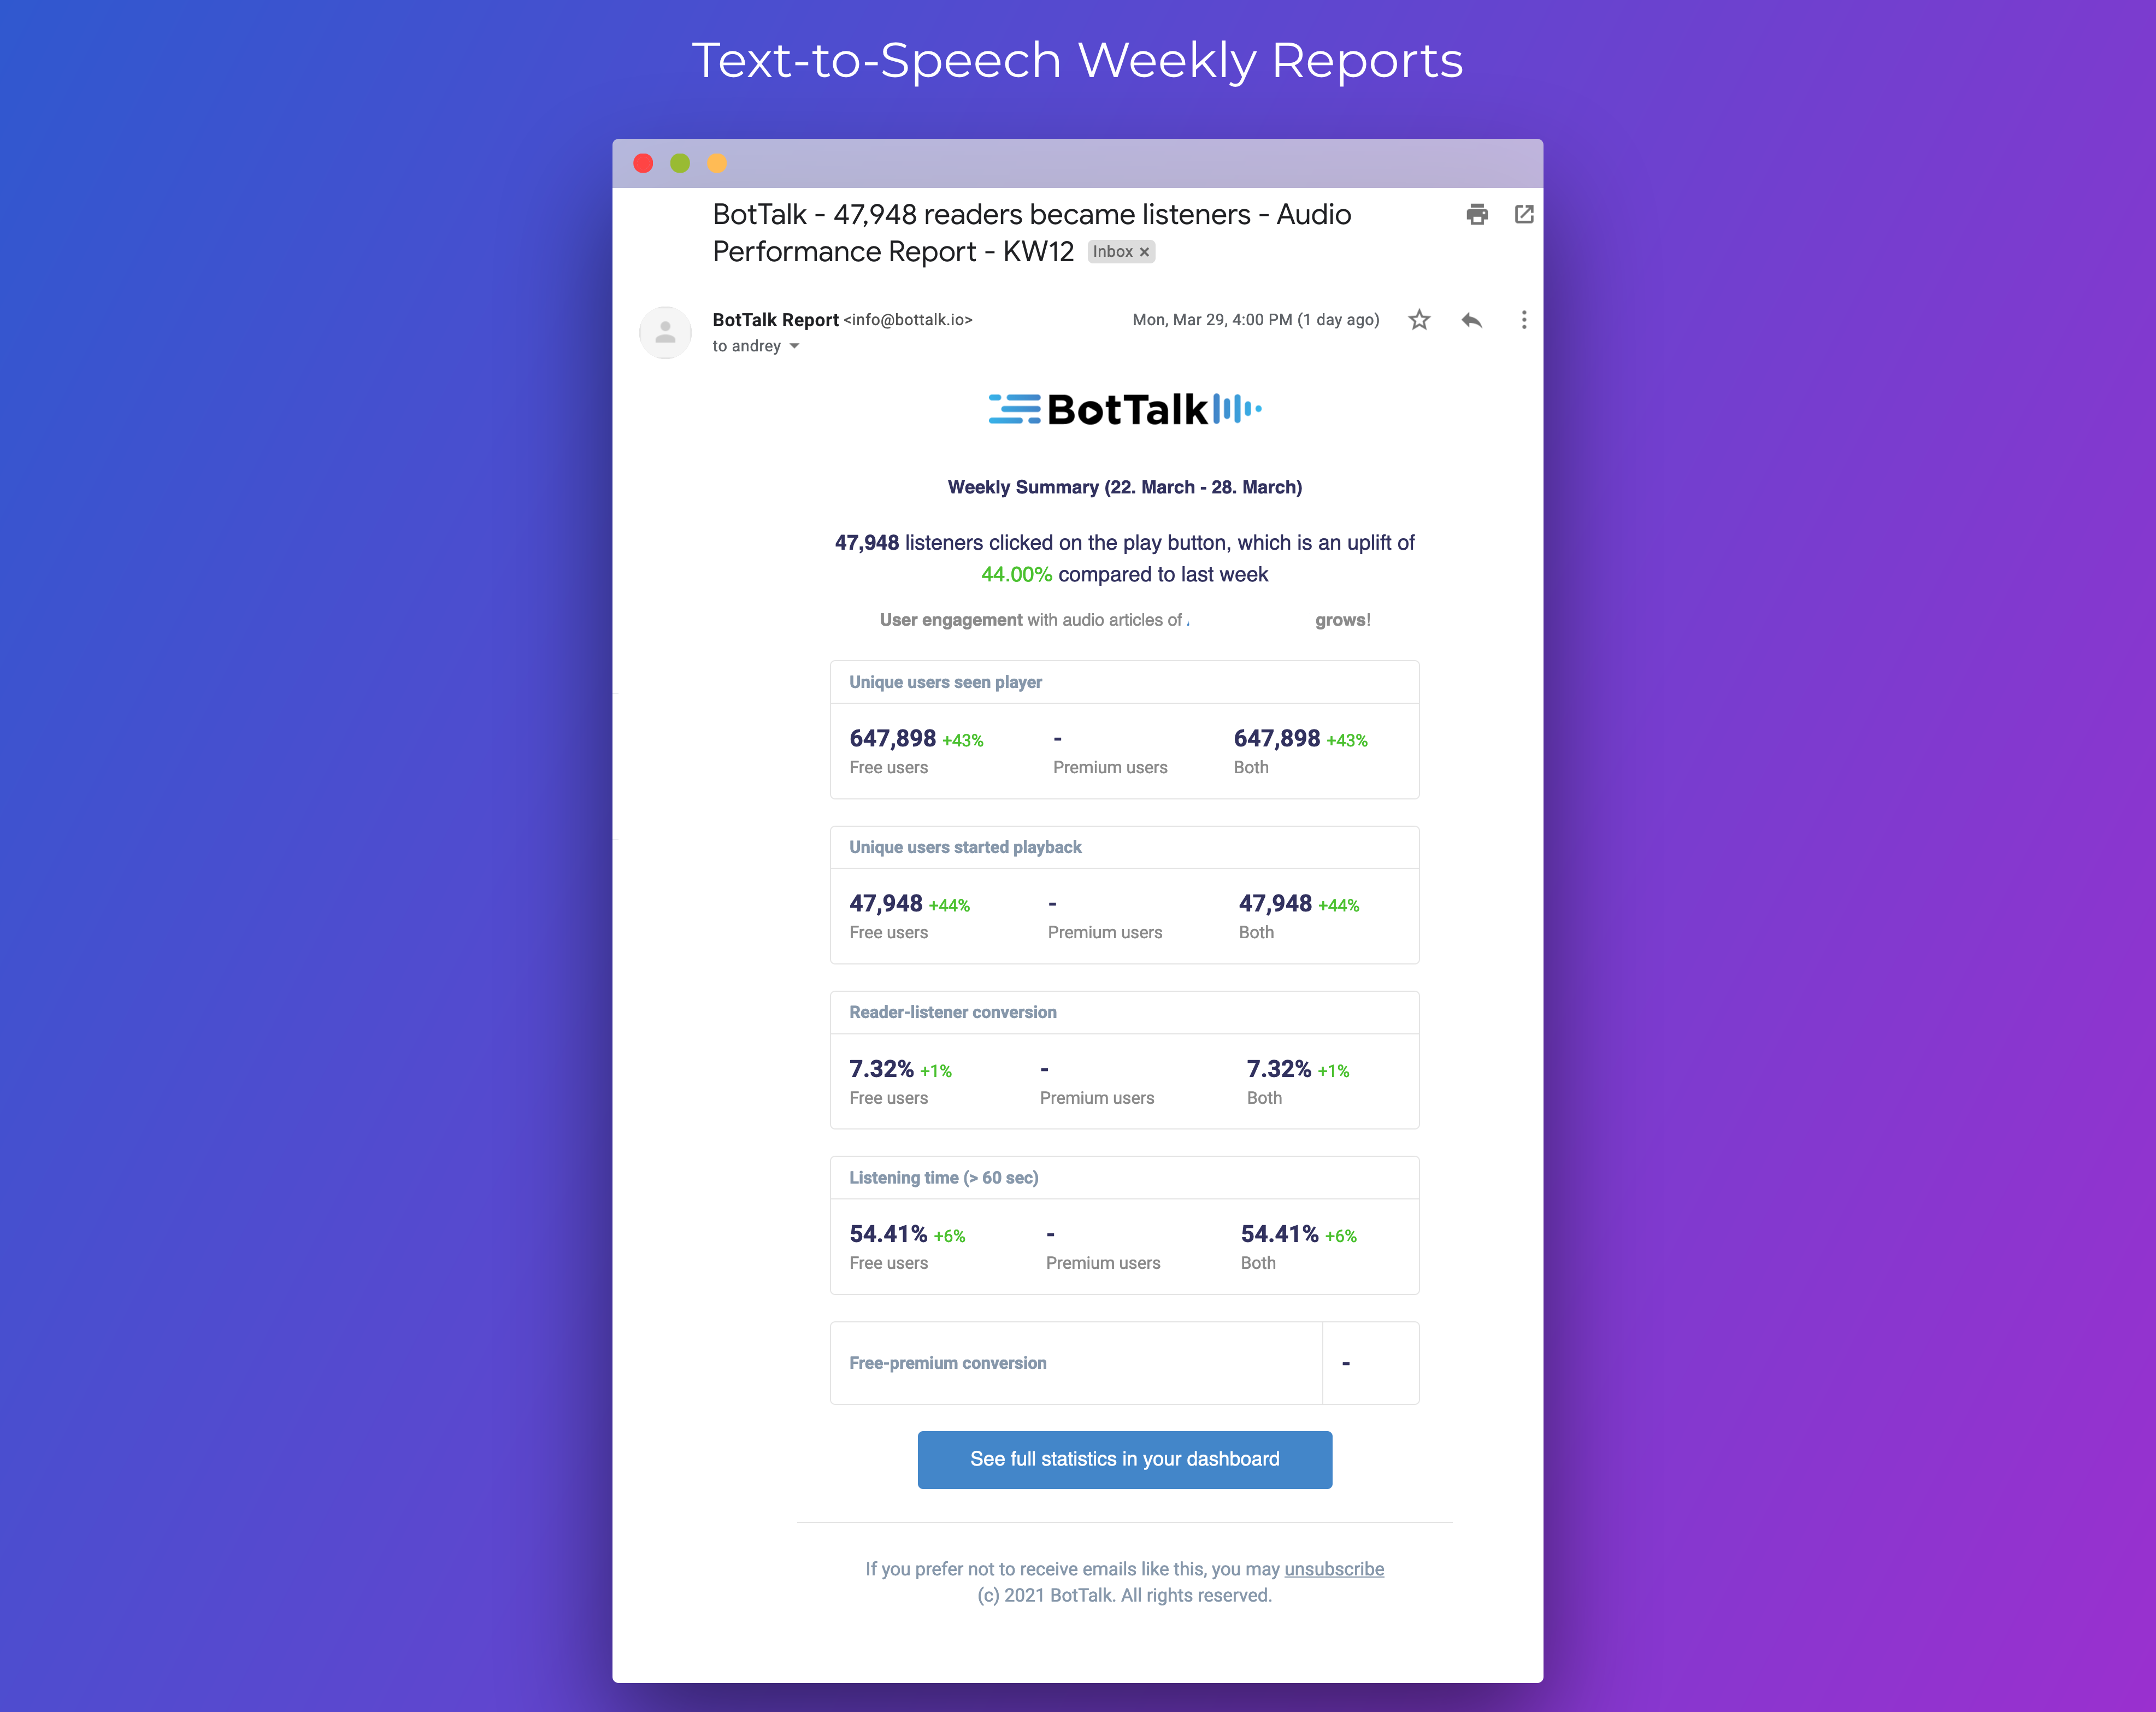 BotTalk weekly text-to-speech reports